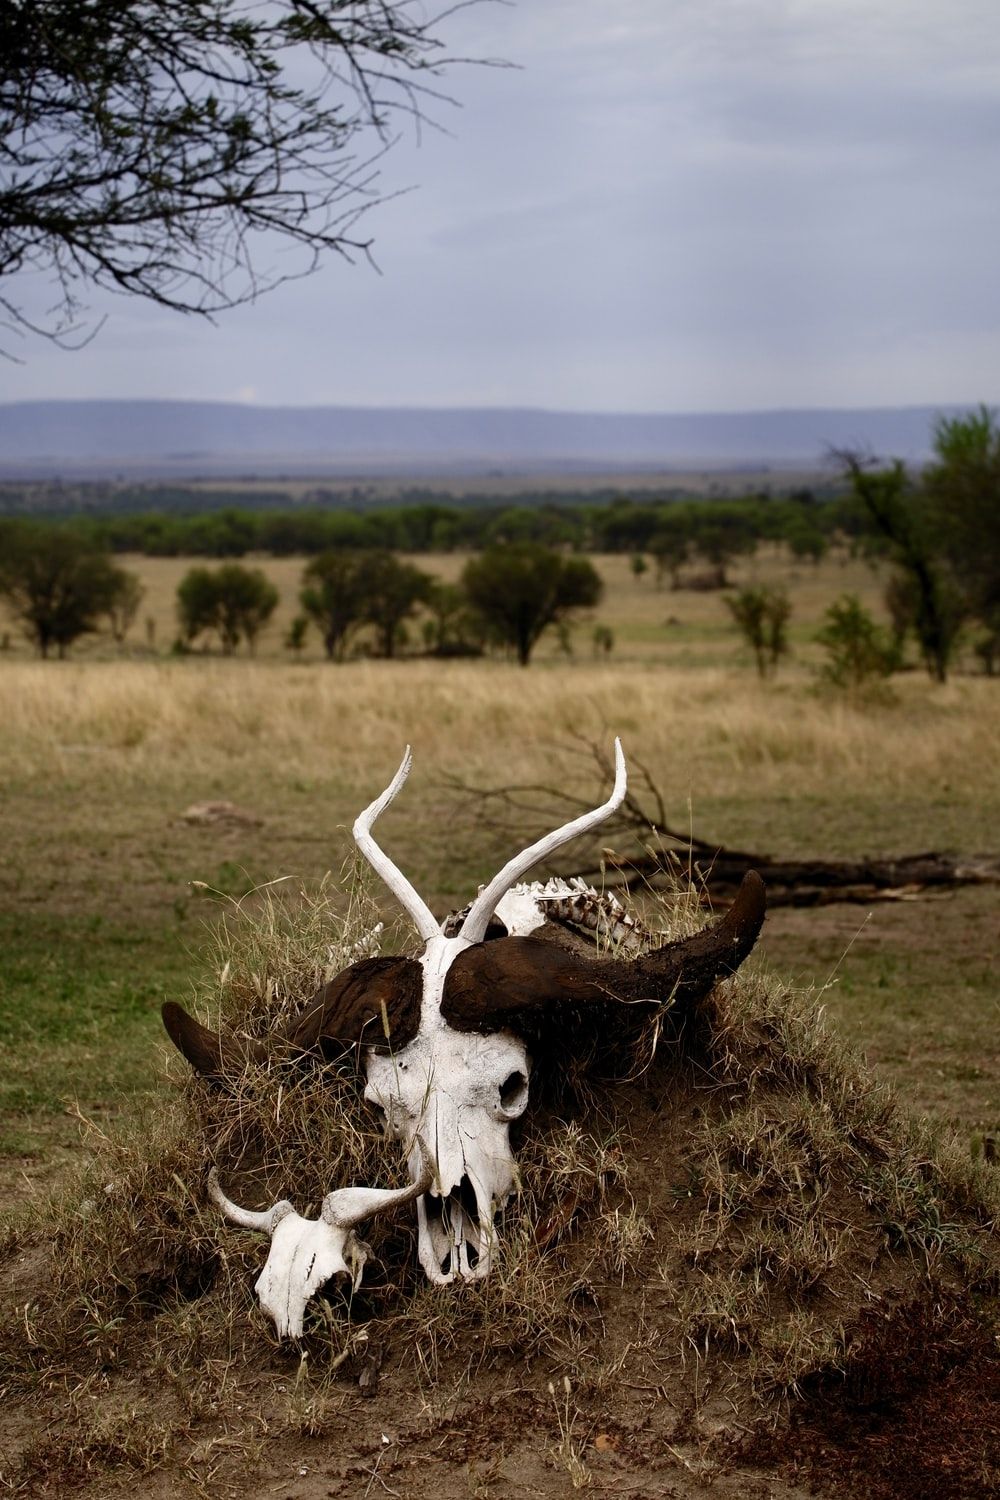 Bull Skull Picture. Download Free Image